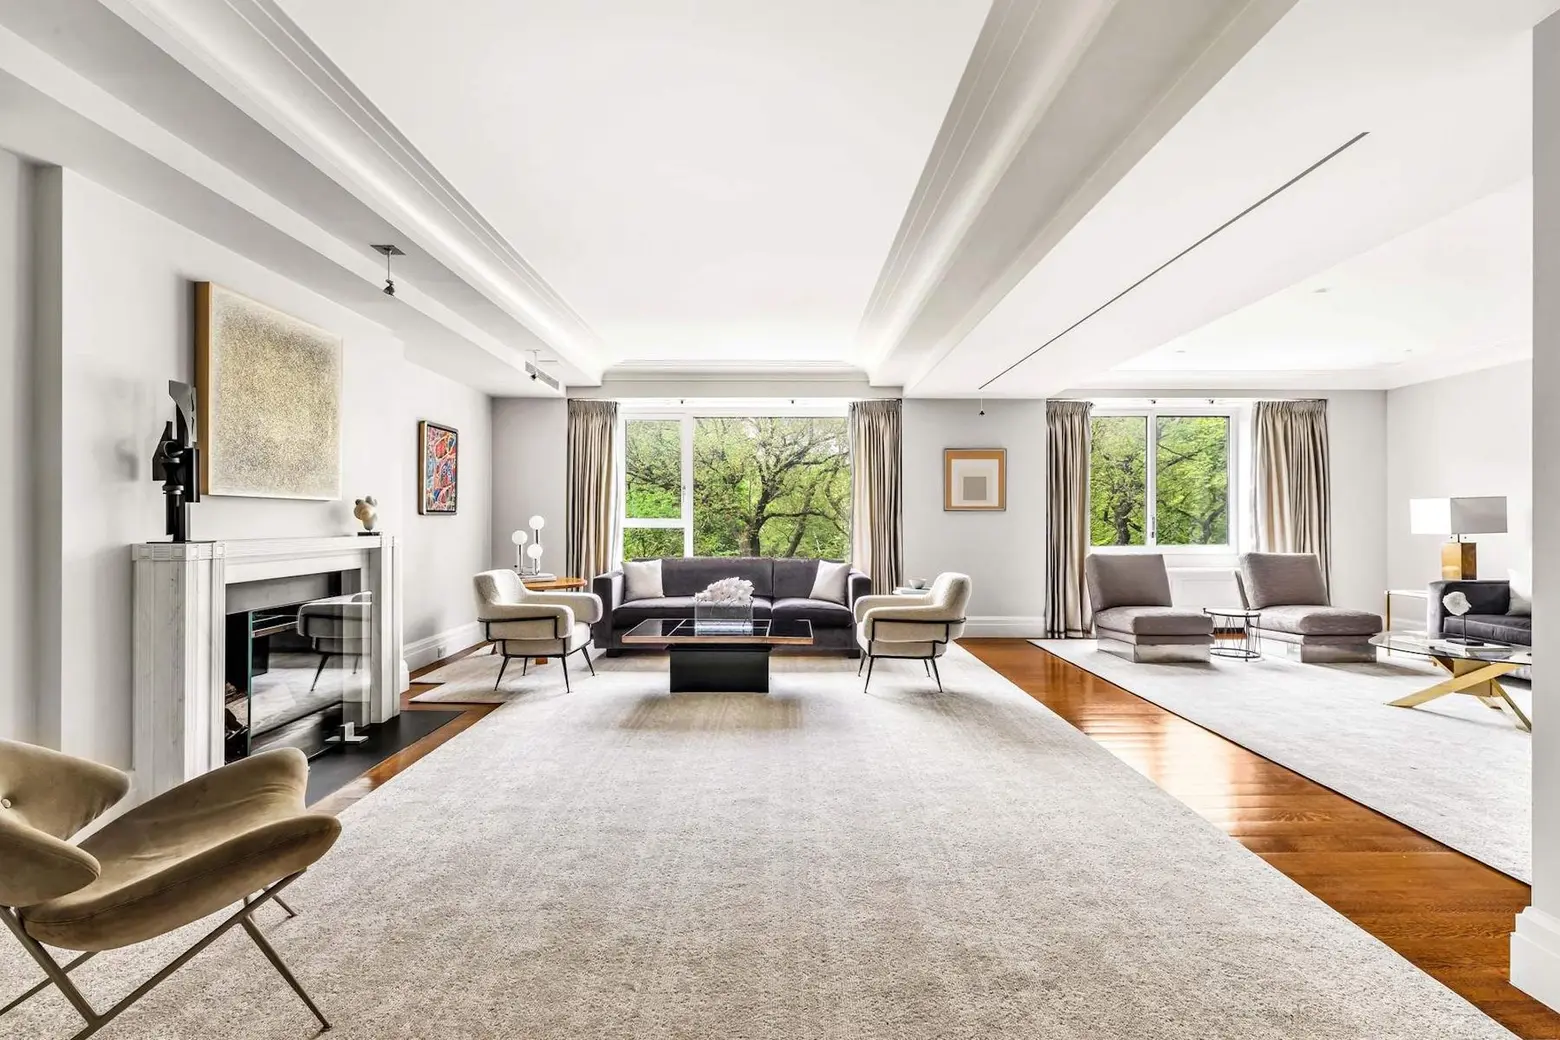 For $12.9M, this palatial duplex co-op is an Upper East Side fairytale home overlooking Central Park